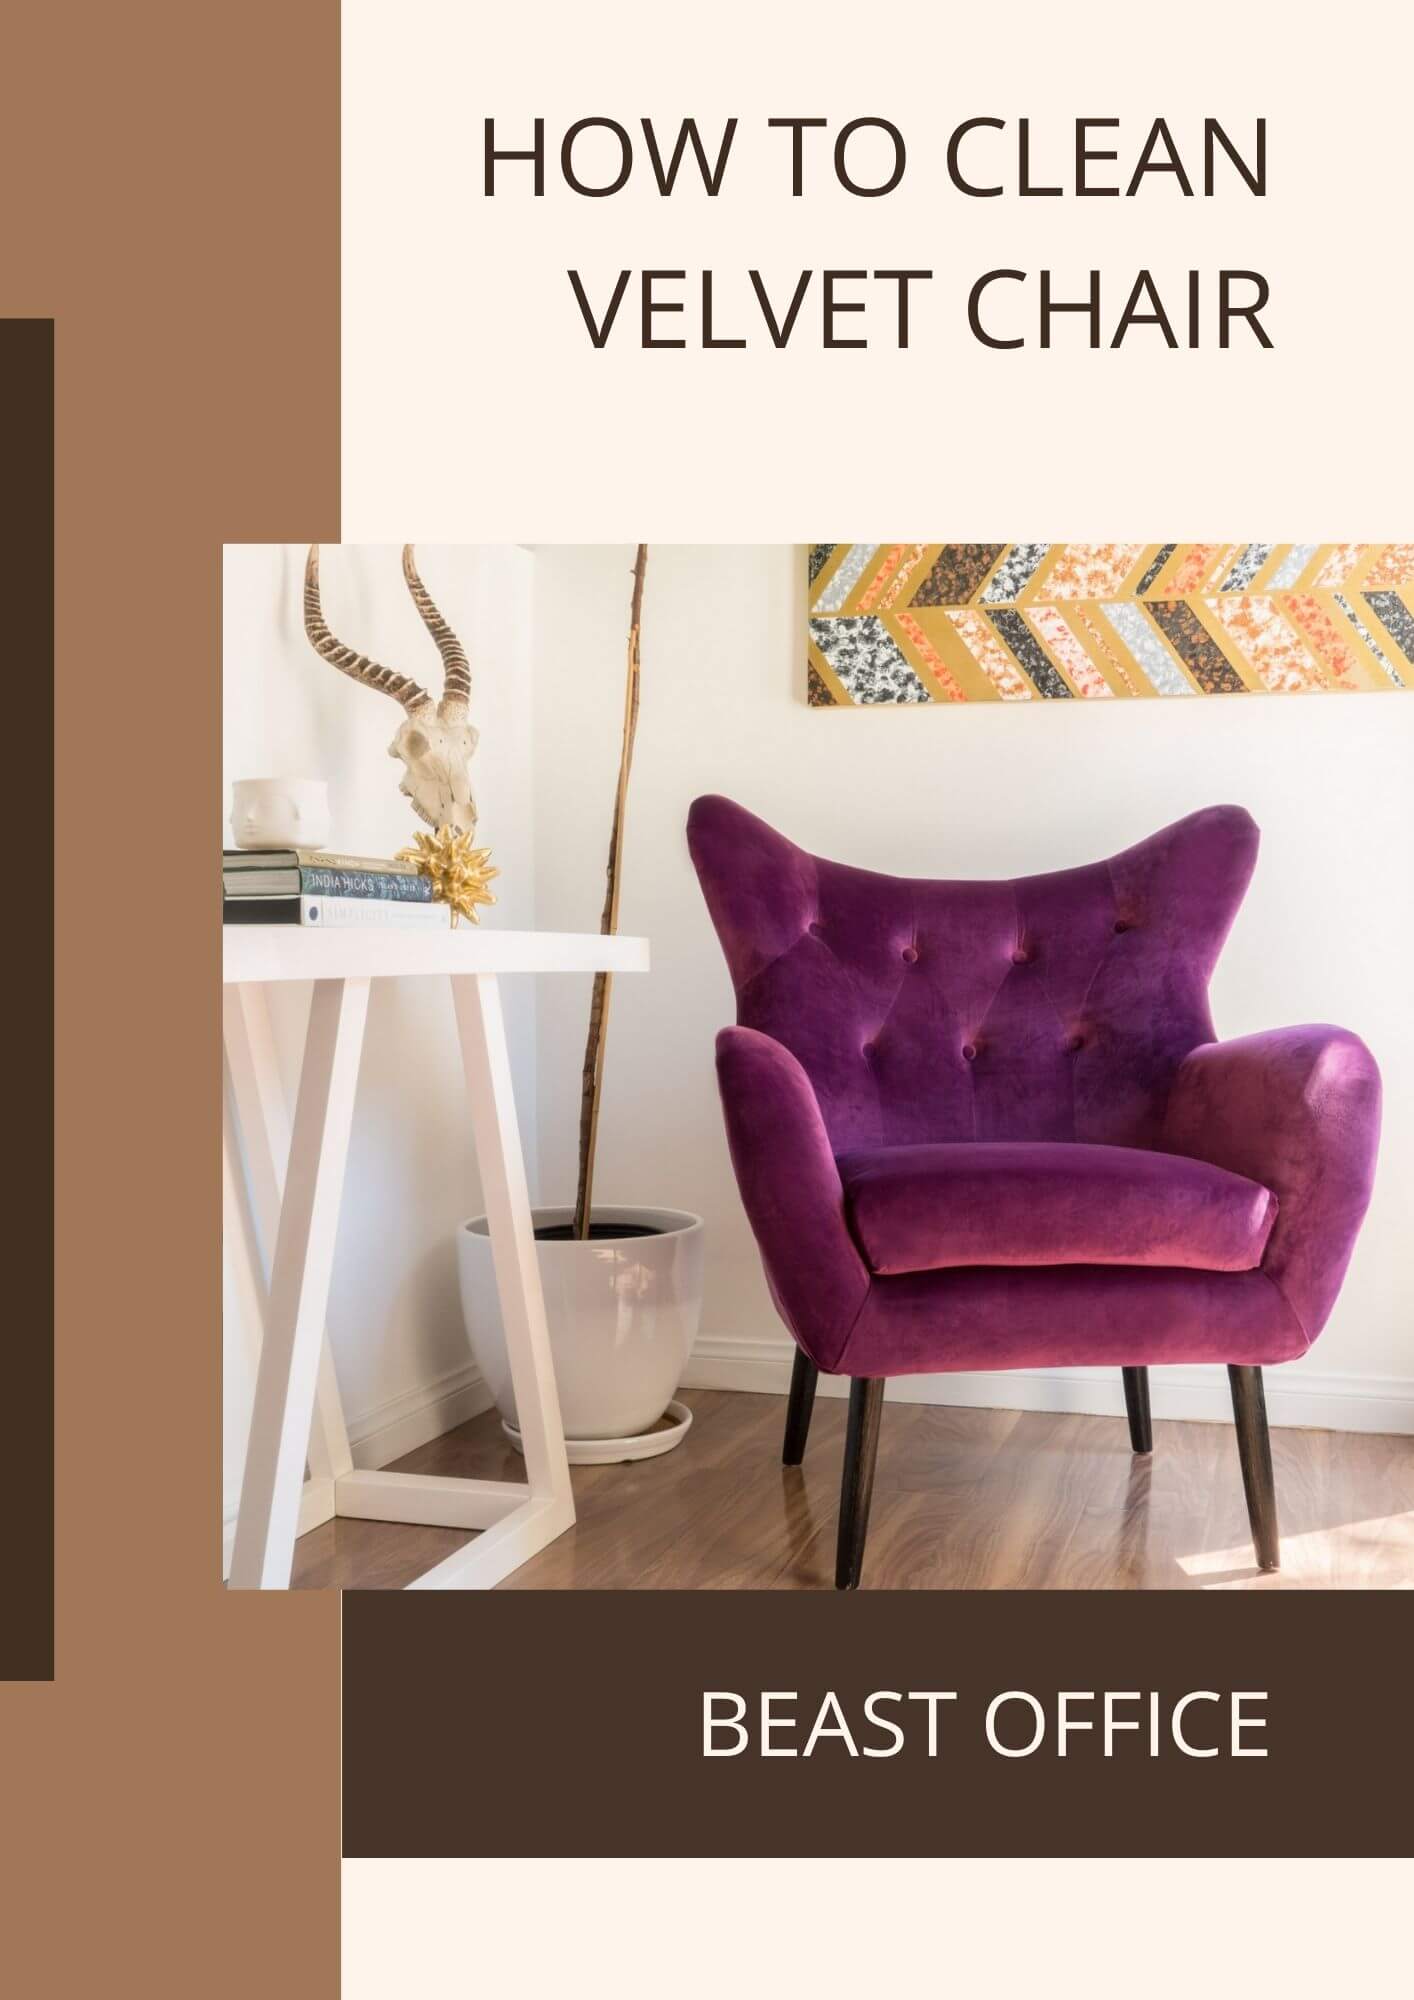 How to Clean Velvet Chair